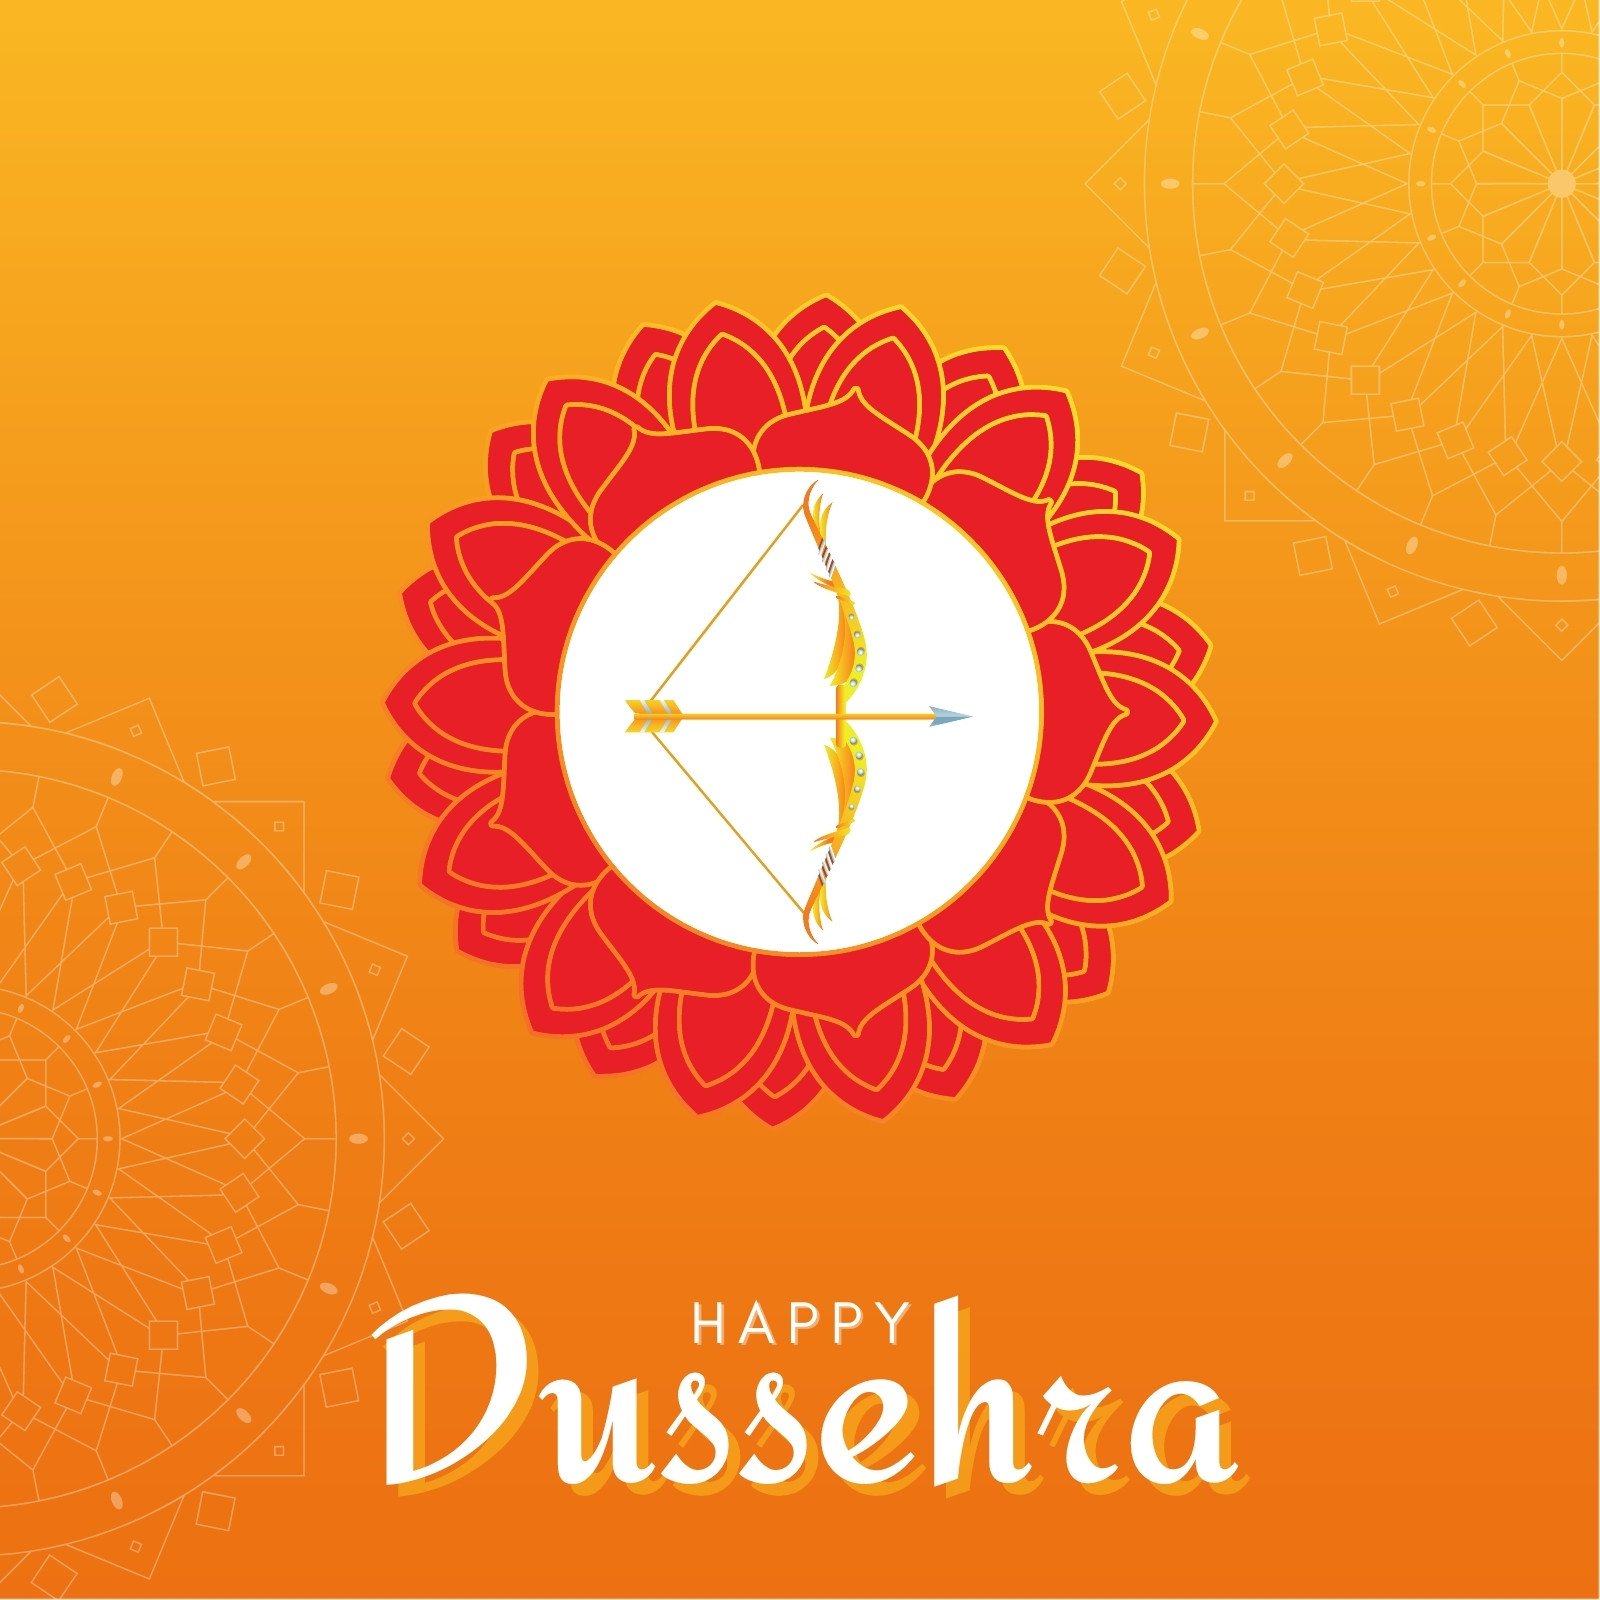 70+ Happy Dussehra Wishes Images Greetings and Templates | by Thepngworld |  Medium